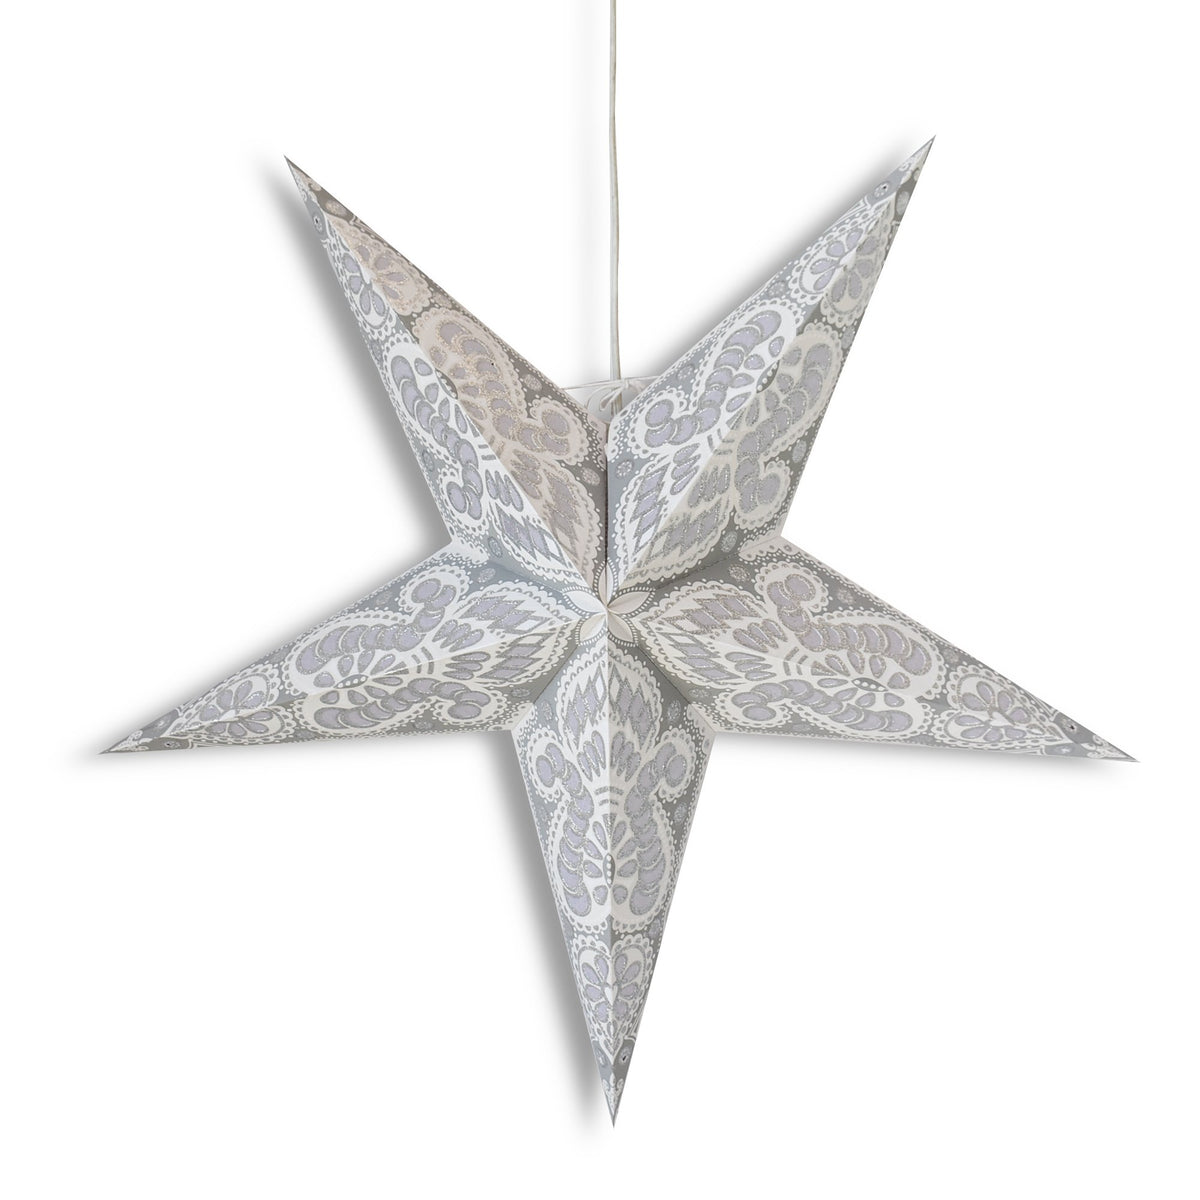 24&quot; White Peacock Glitter Paper Star Lantern, Hanging Wedding &amp; Party Decoration - PaperLanternStore.com - Paper Lanterns, Decor, Party Lights &amp; More